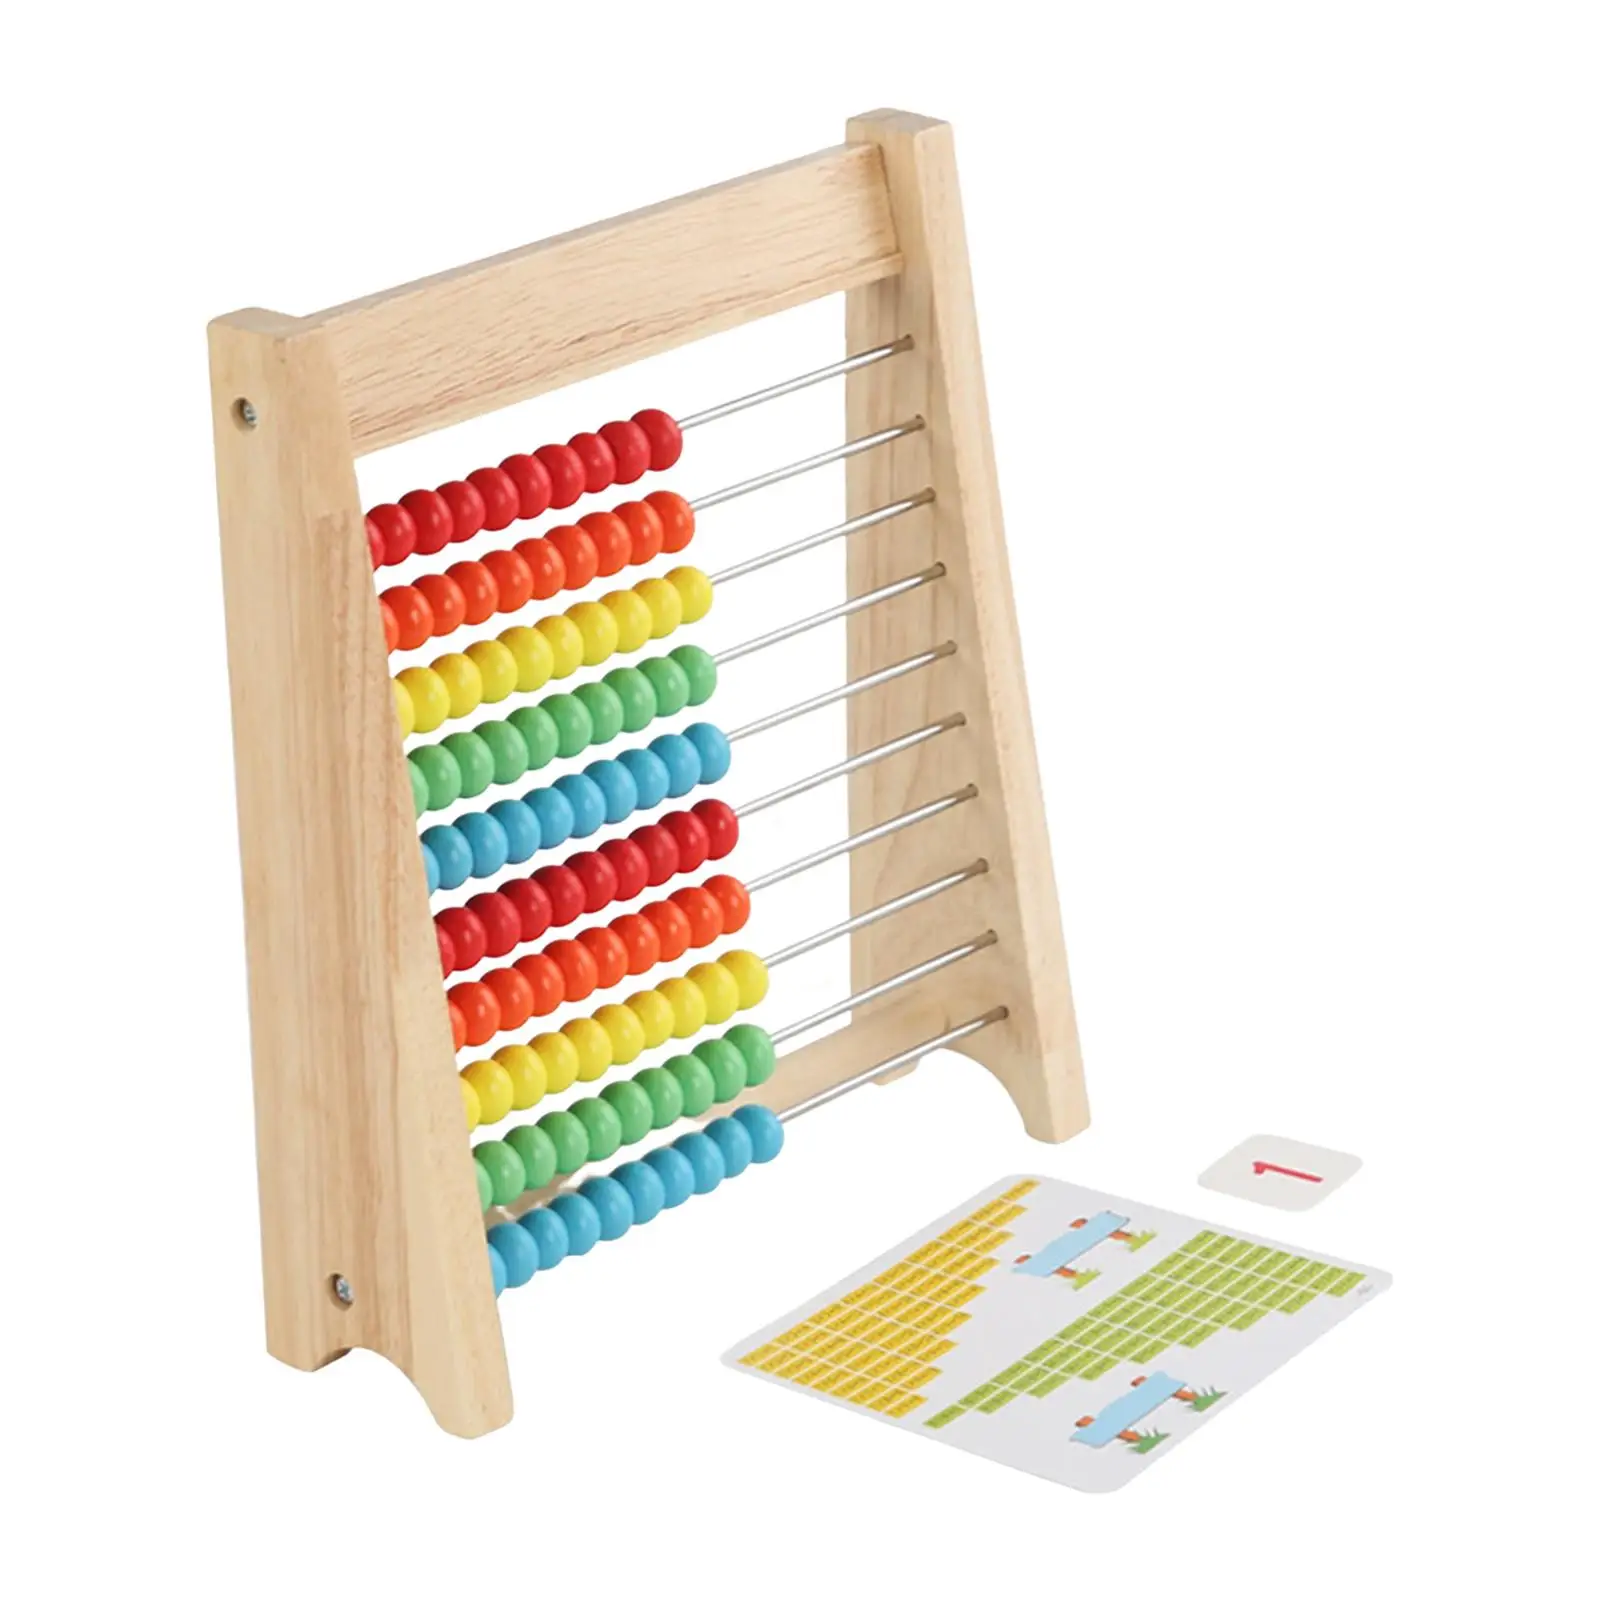 Wooden Abacus Toy, Classic Math Game Toy for Early Childhood Education & Development with 100 Beads